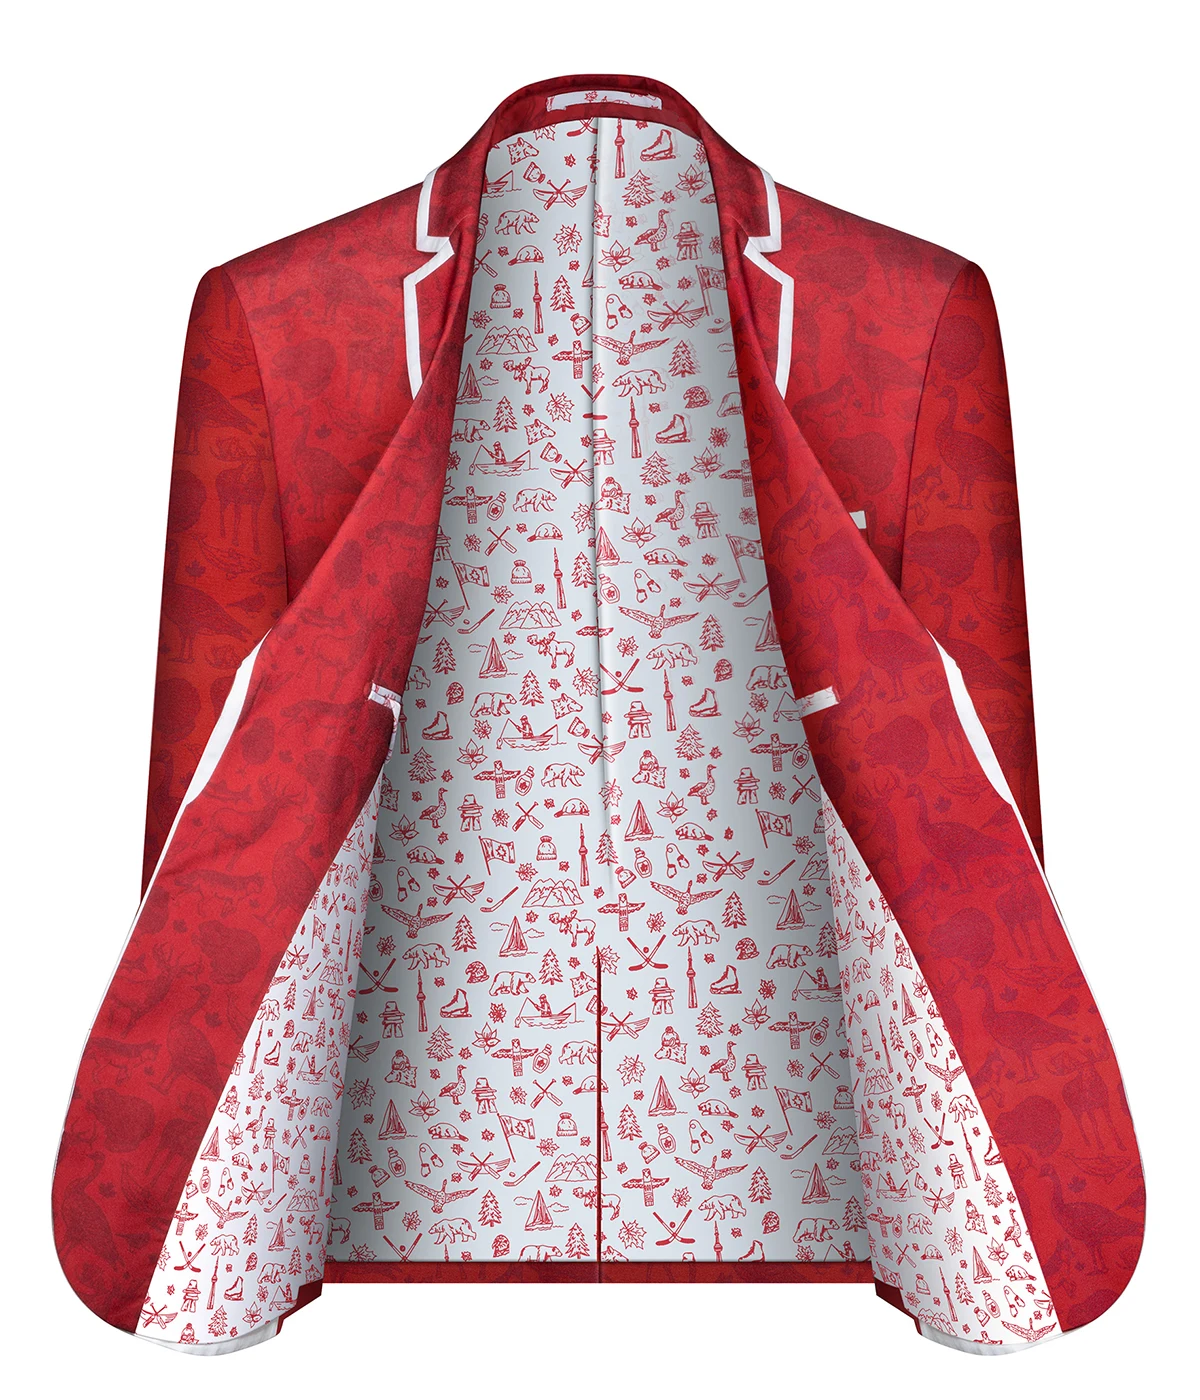 Red print blazer photography 3D hollow photography